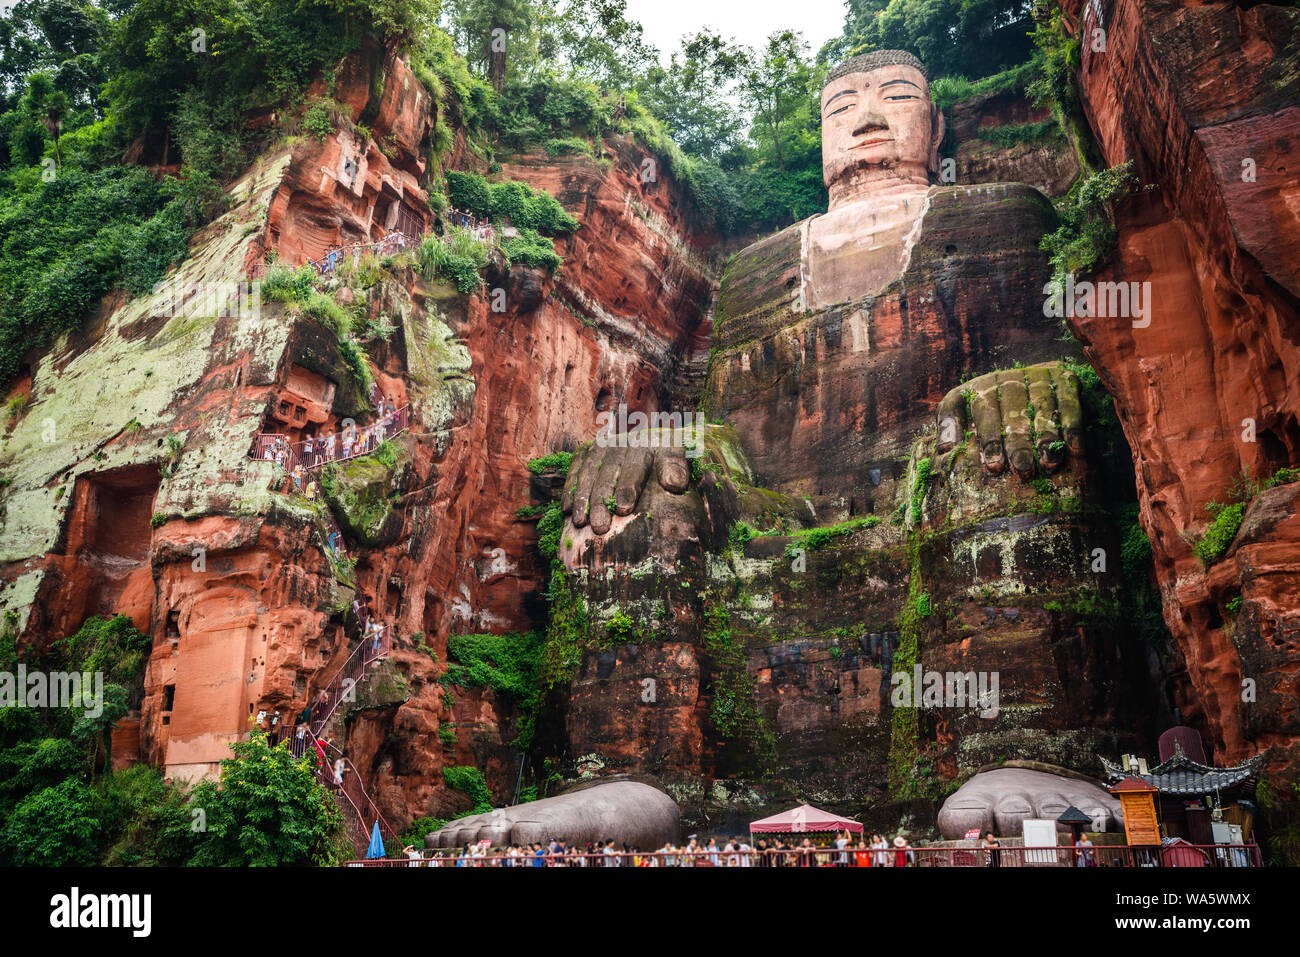 Full view of the Leshan Giant Buddha or Dafo from river boat in Leshan Sichuan China Stock Photo